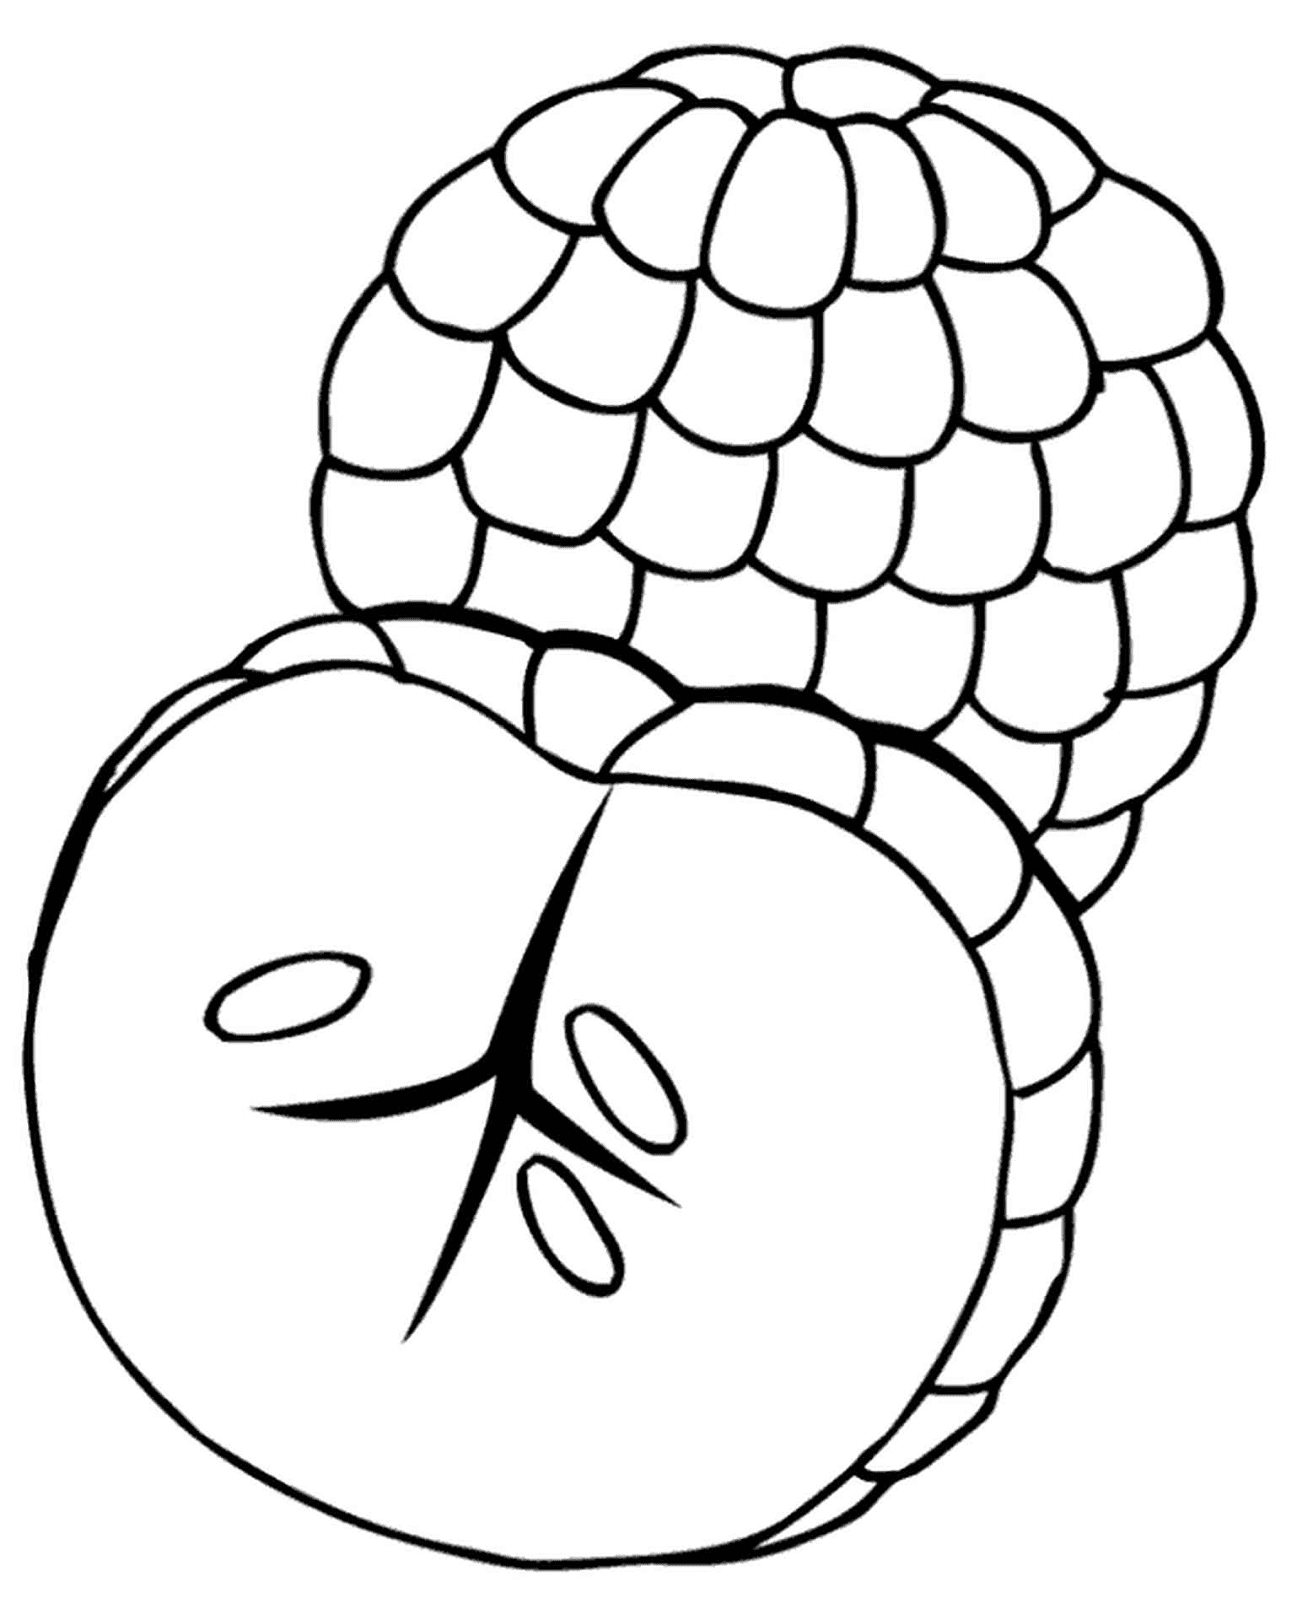 Exotic Fruit Coloring Pages